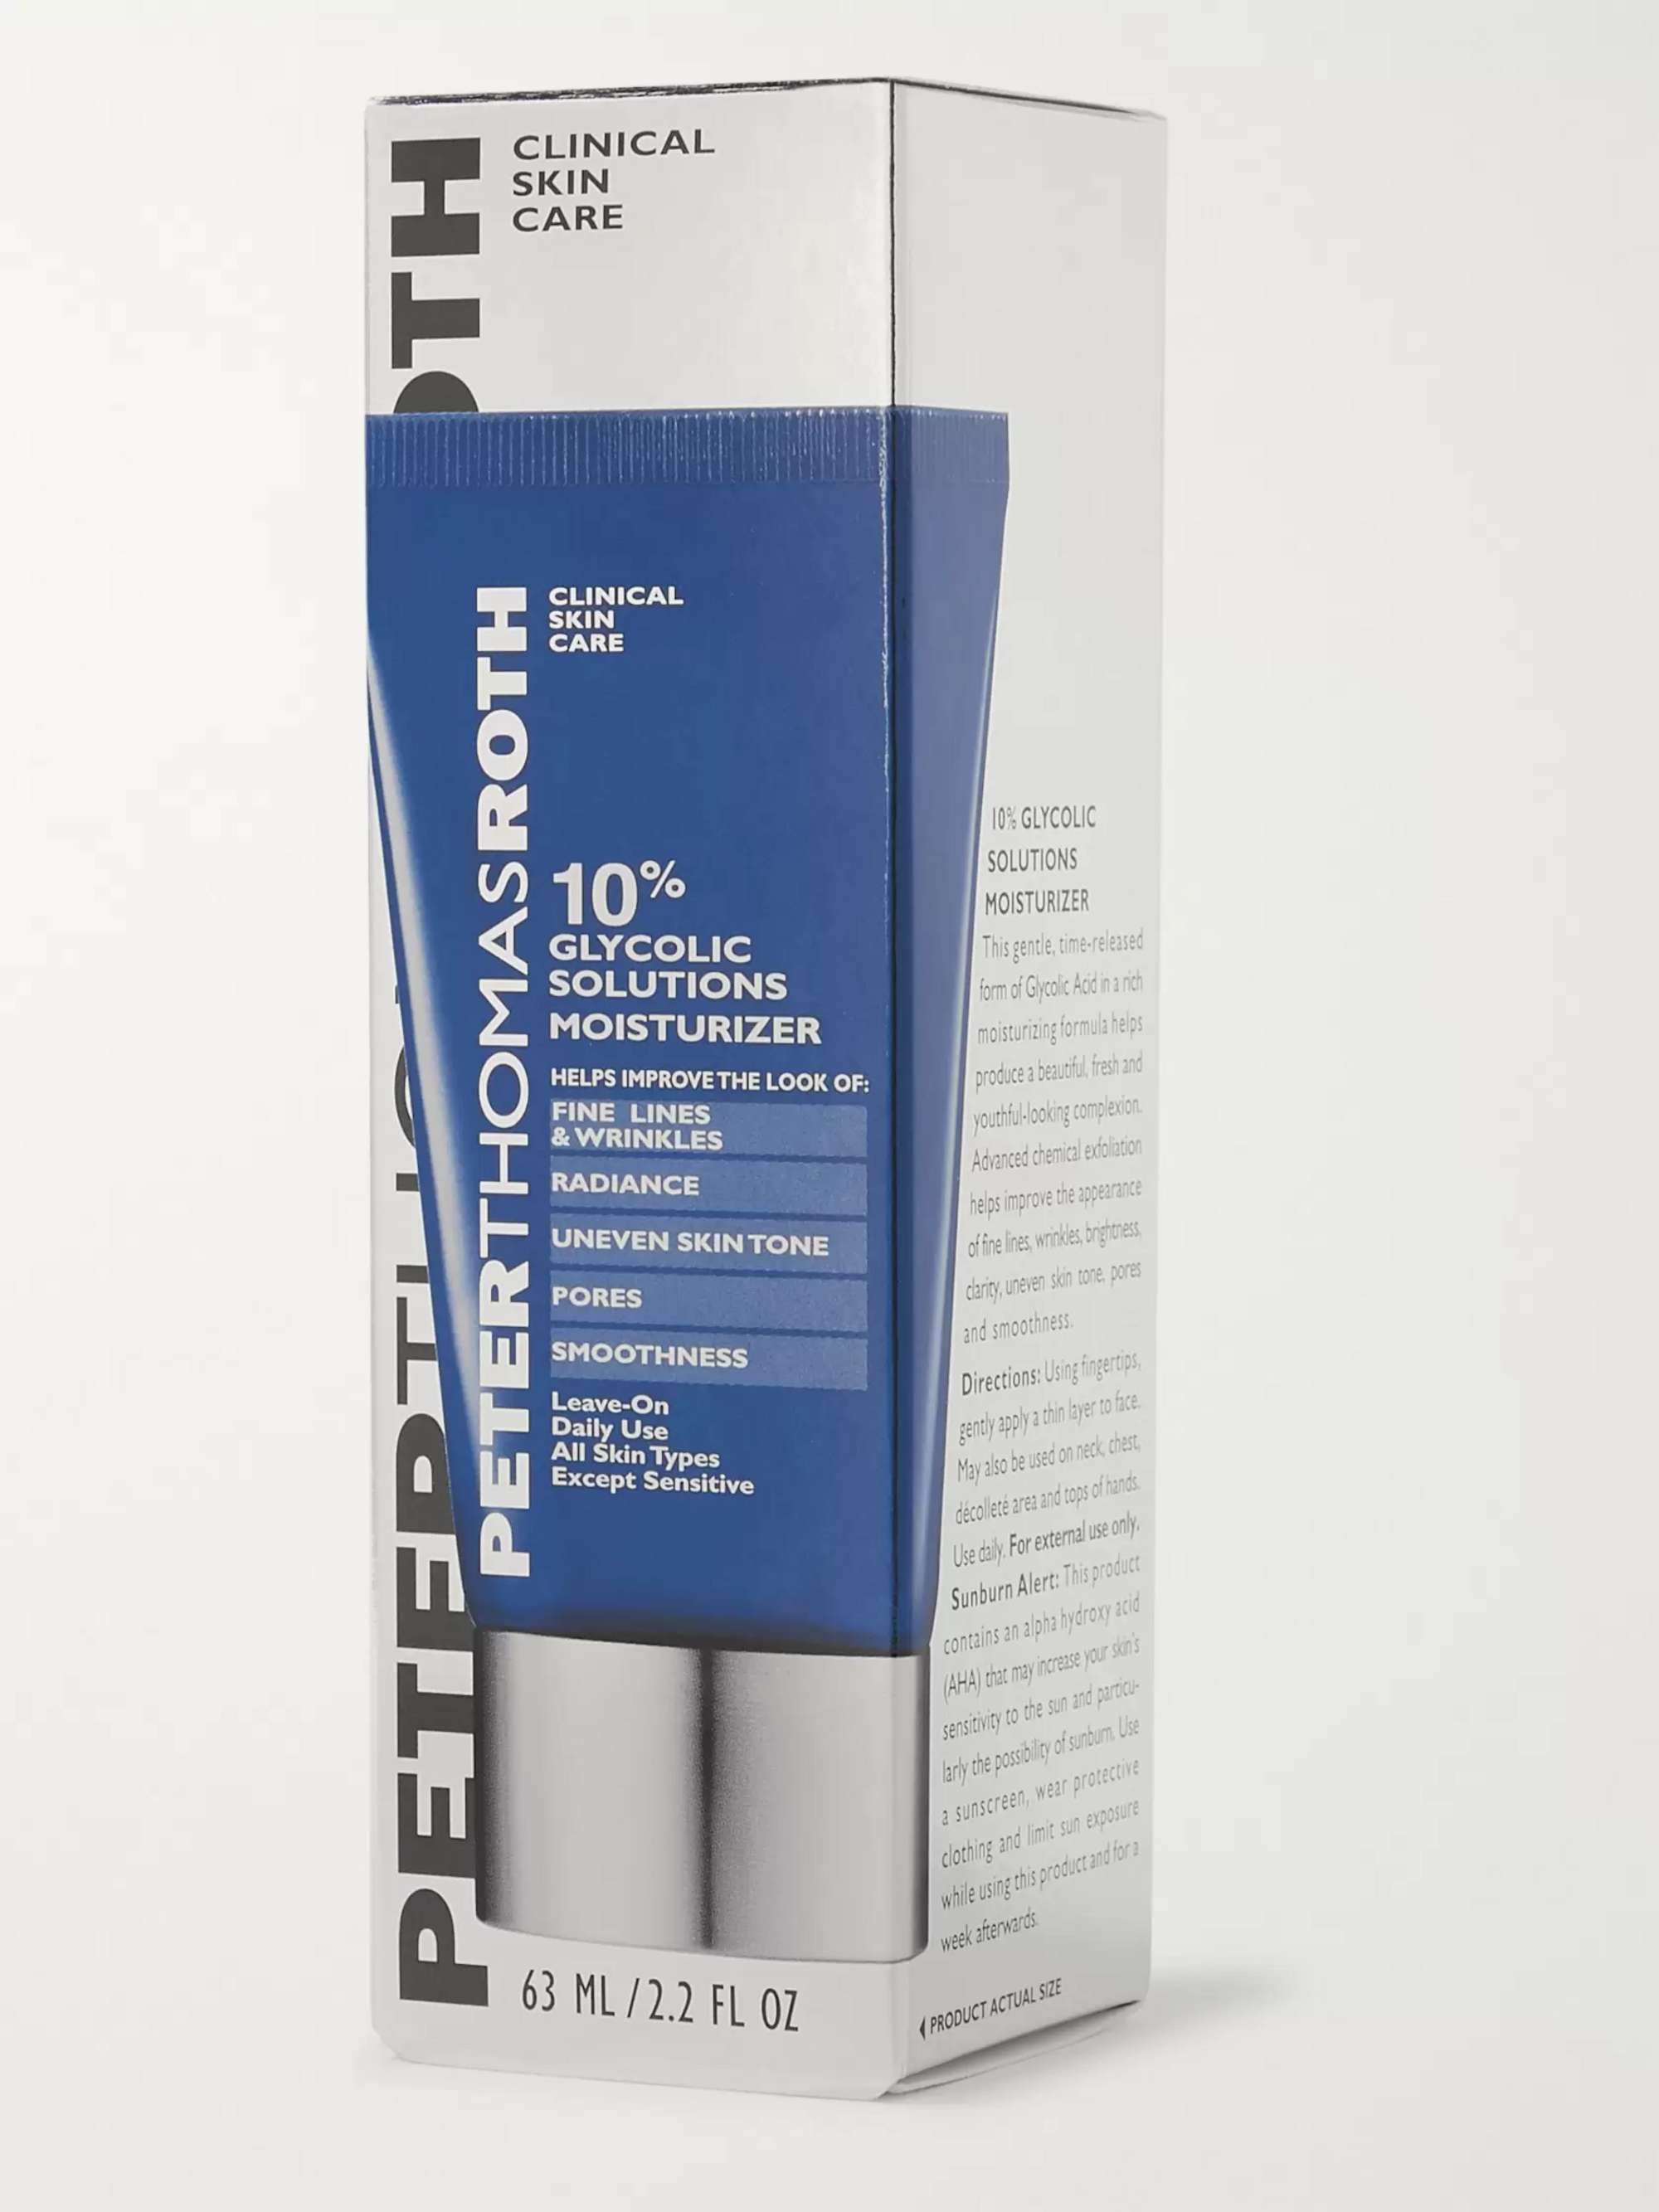 PETER THOMAS ROTH 10% Glycolic Solutions Moisturizer, 63ml